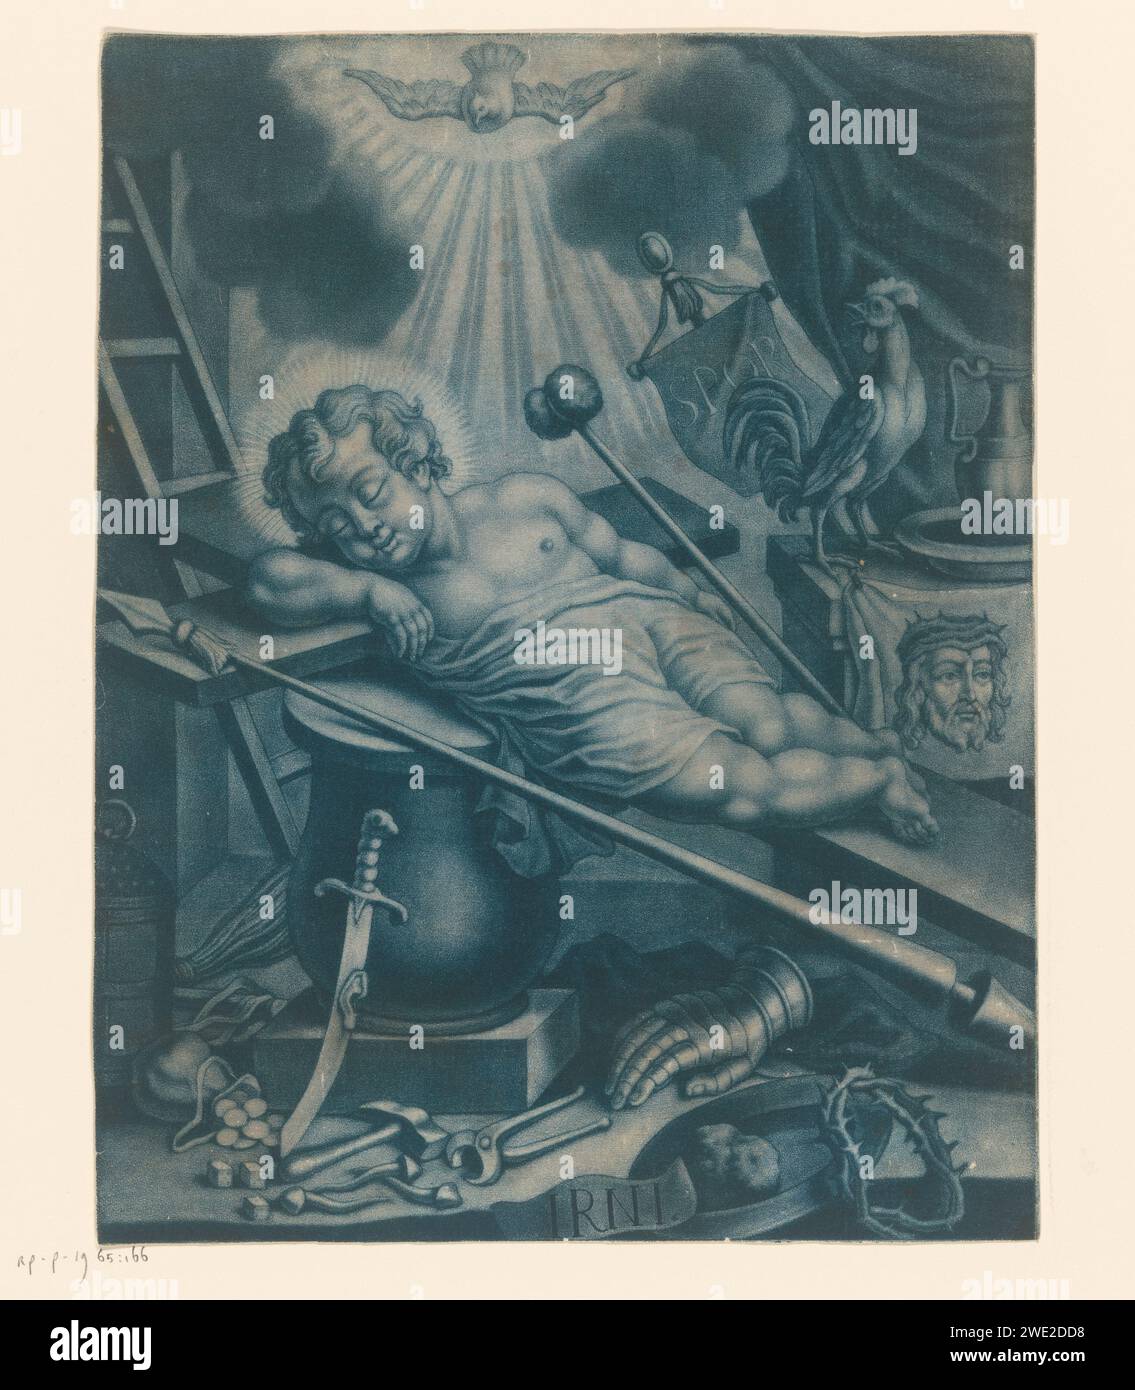 Christ child sleeping between the torture tools, Anonymous, Johann Christian Leopold (Possible), 1709 - 1755 print  Germany paper  sleeping; unconsciousness Stock Photo